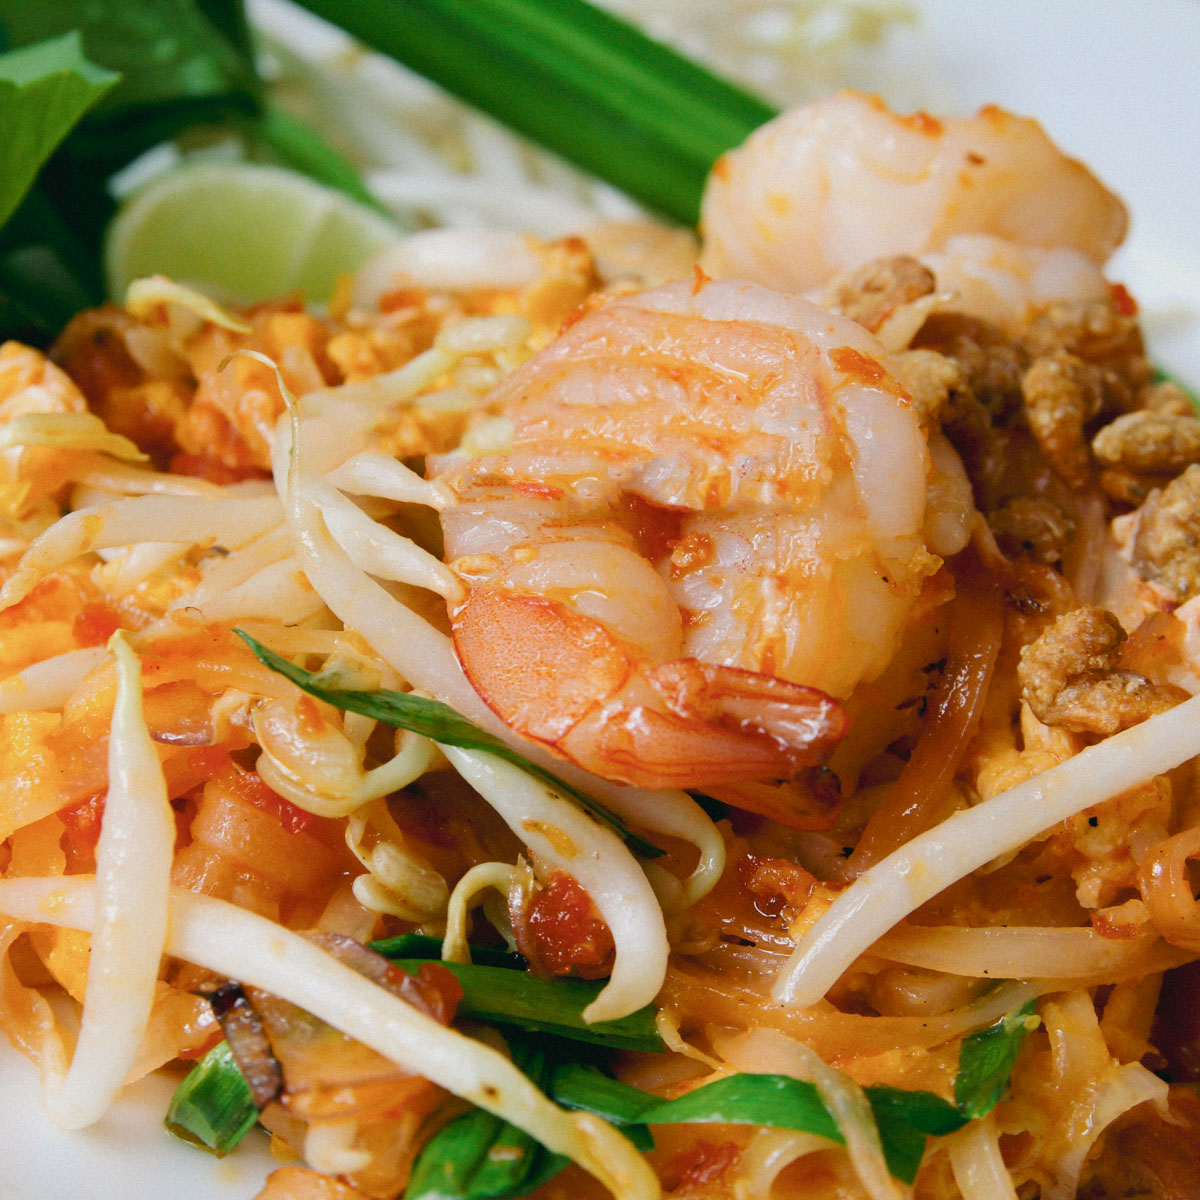 Prawn, shoots, noodles, lime and various ingredients on a plate - The Glory of Thailand